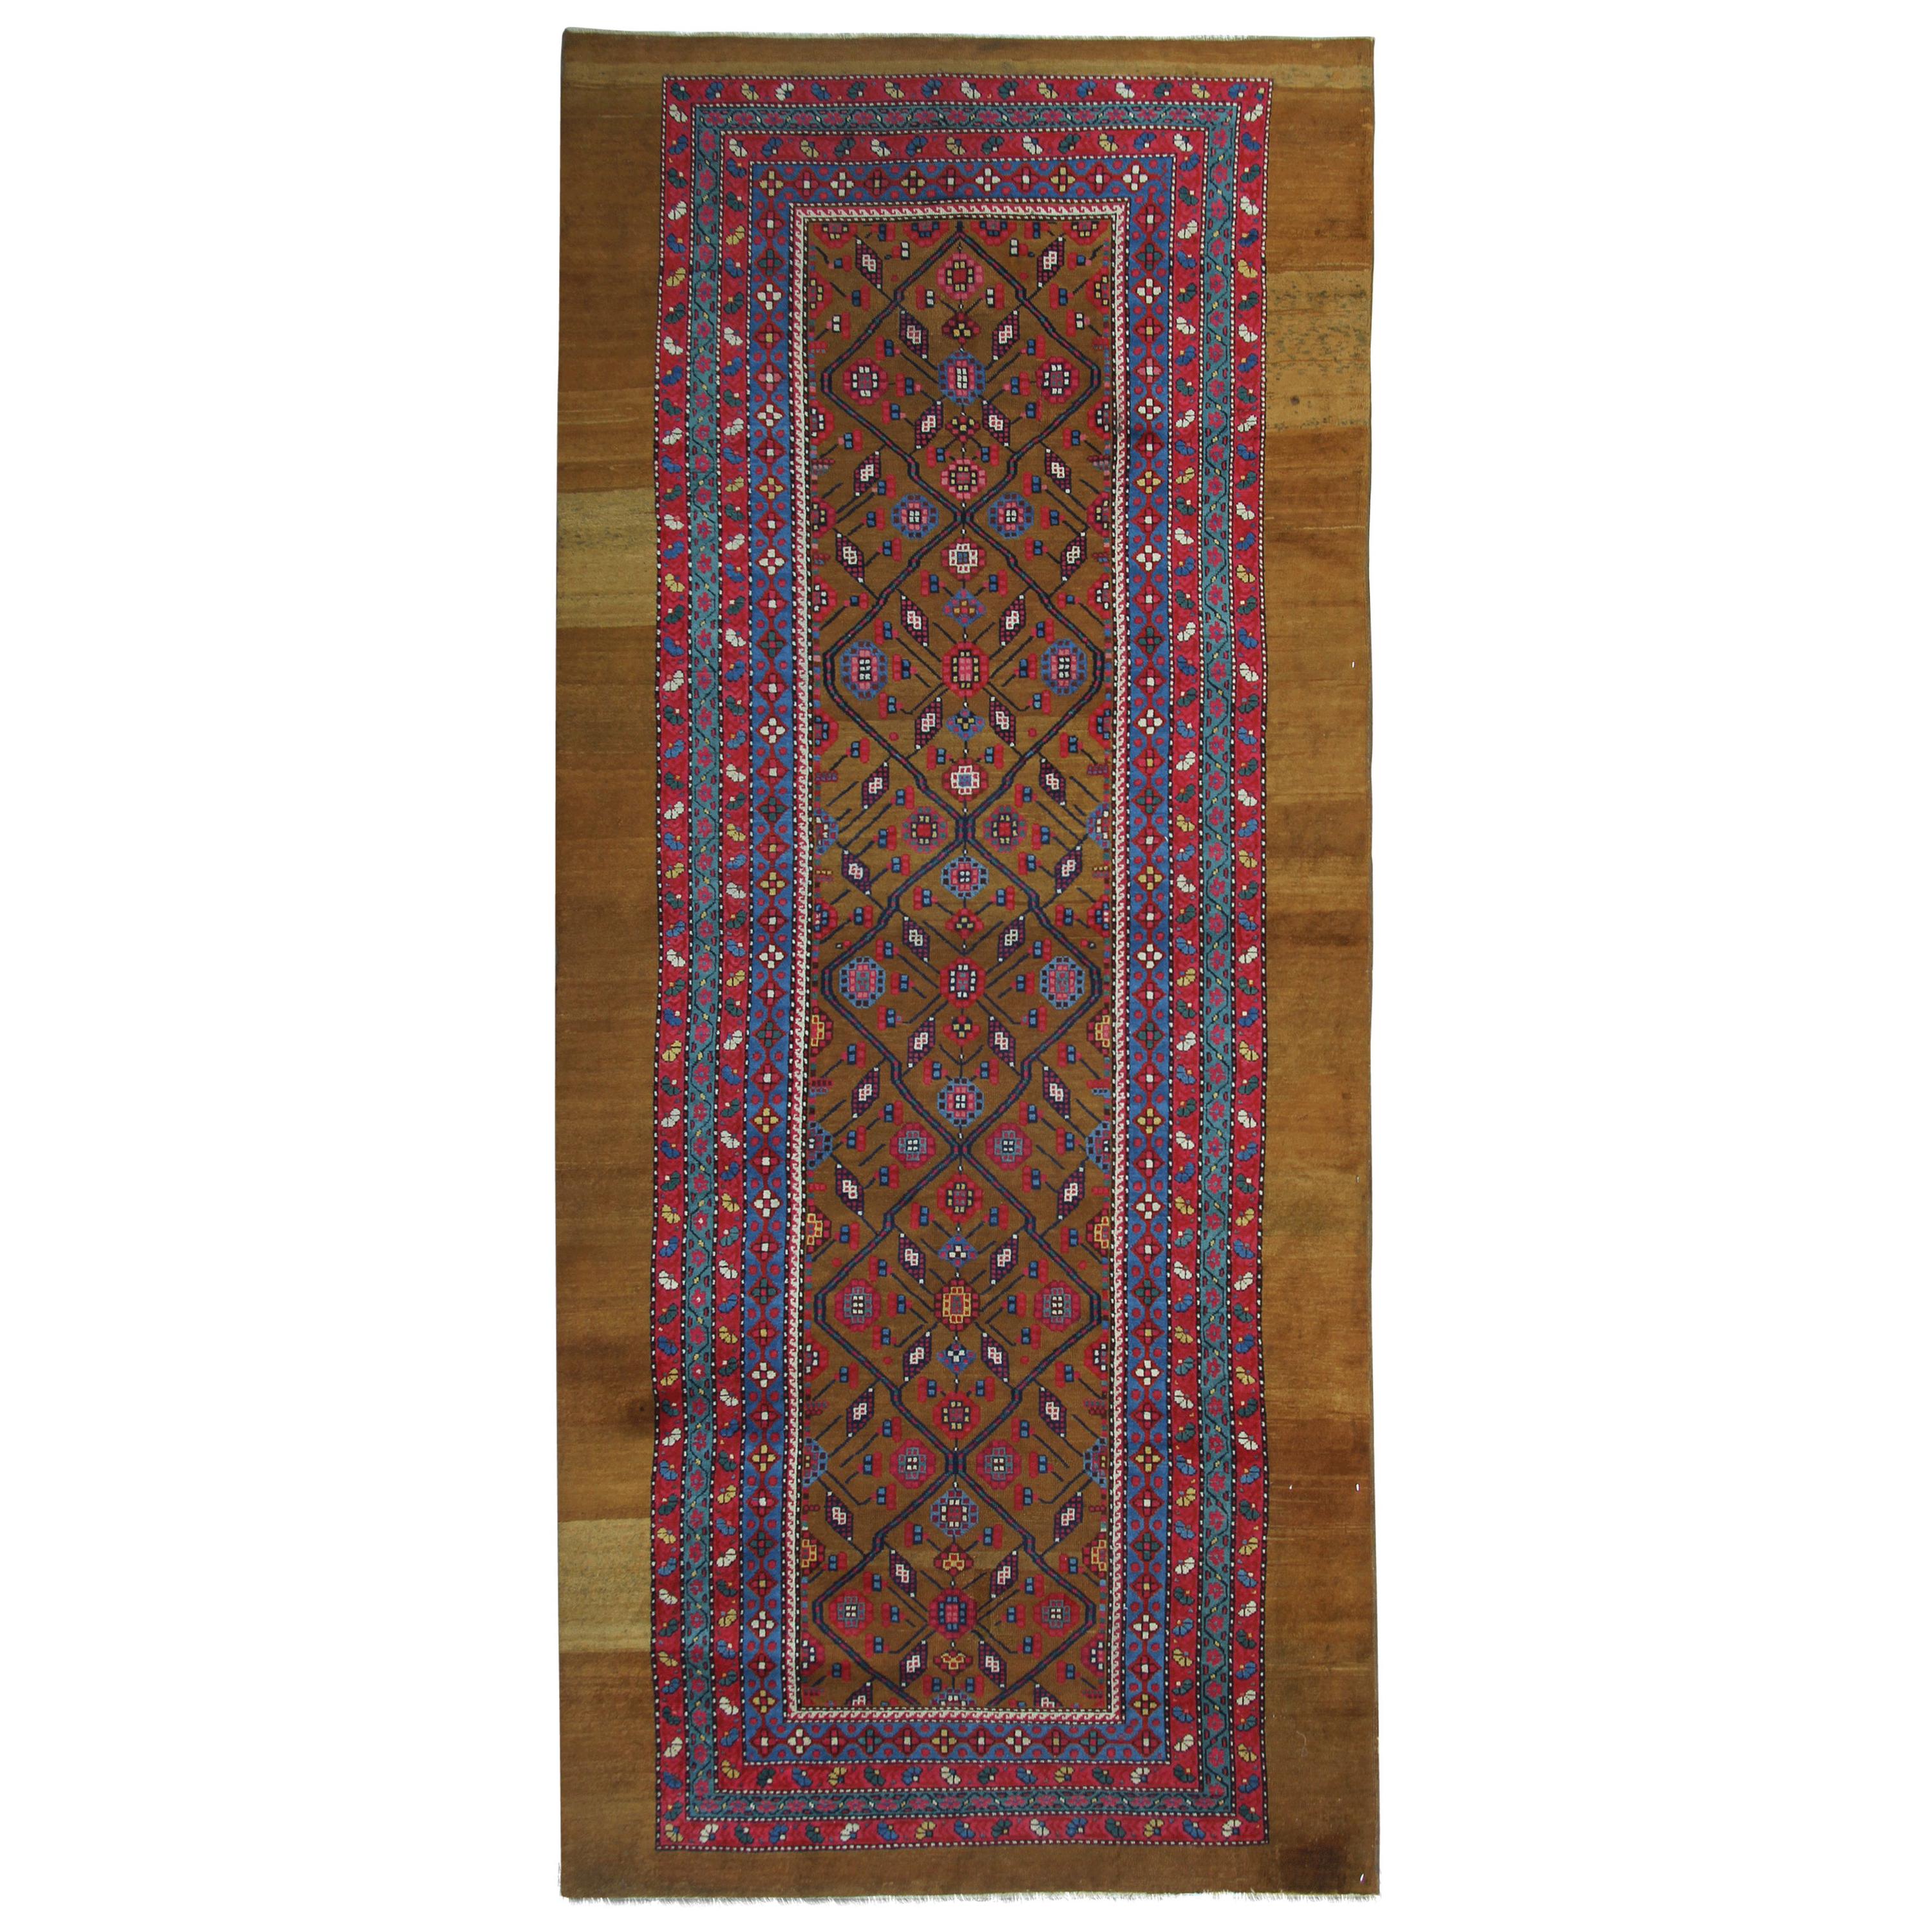 Antique Rugs, Camel Pure Wool Caucasian Handmade Carpet Runners, Oriental Rugs  For Sale